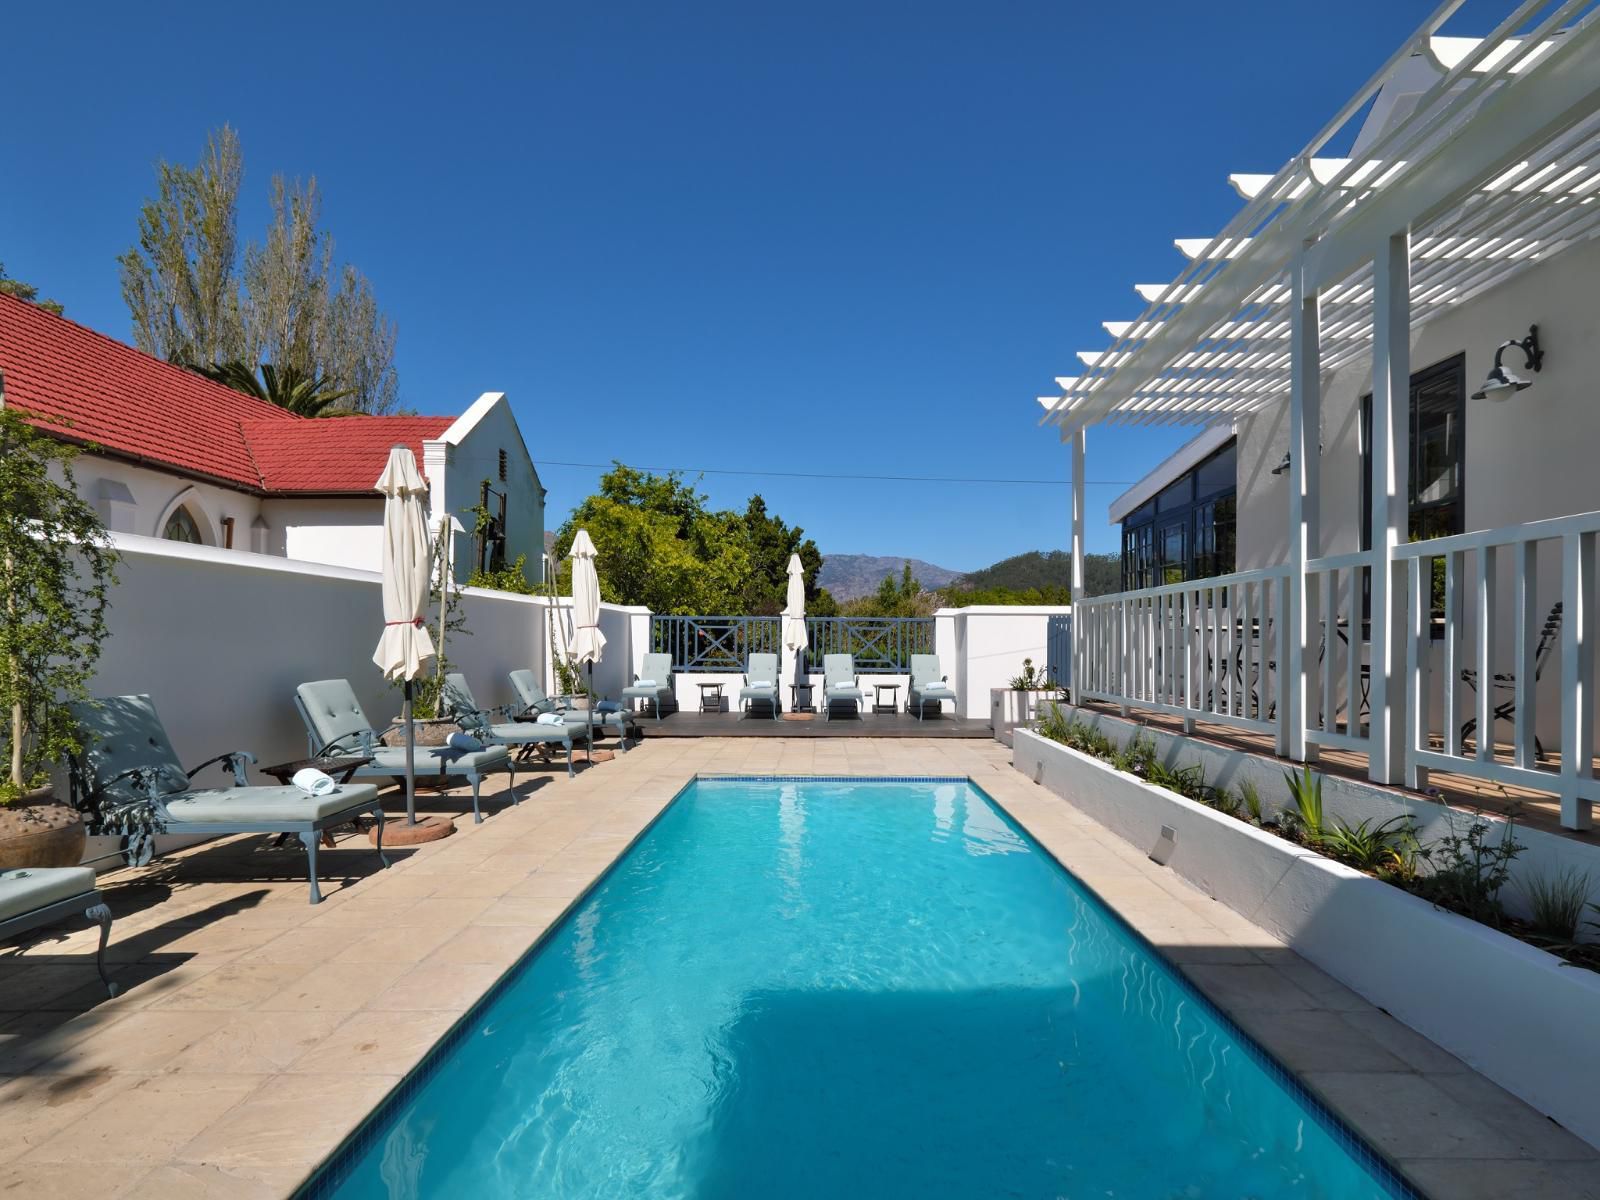 Chapter House Boutique Hotel Franschhoek Western Cape South Africa House, Building, Architecture, Swimming Pool